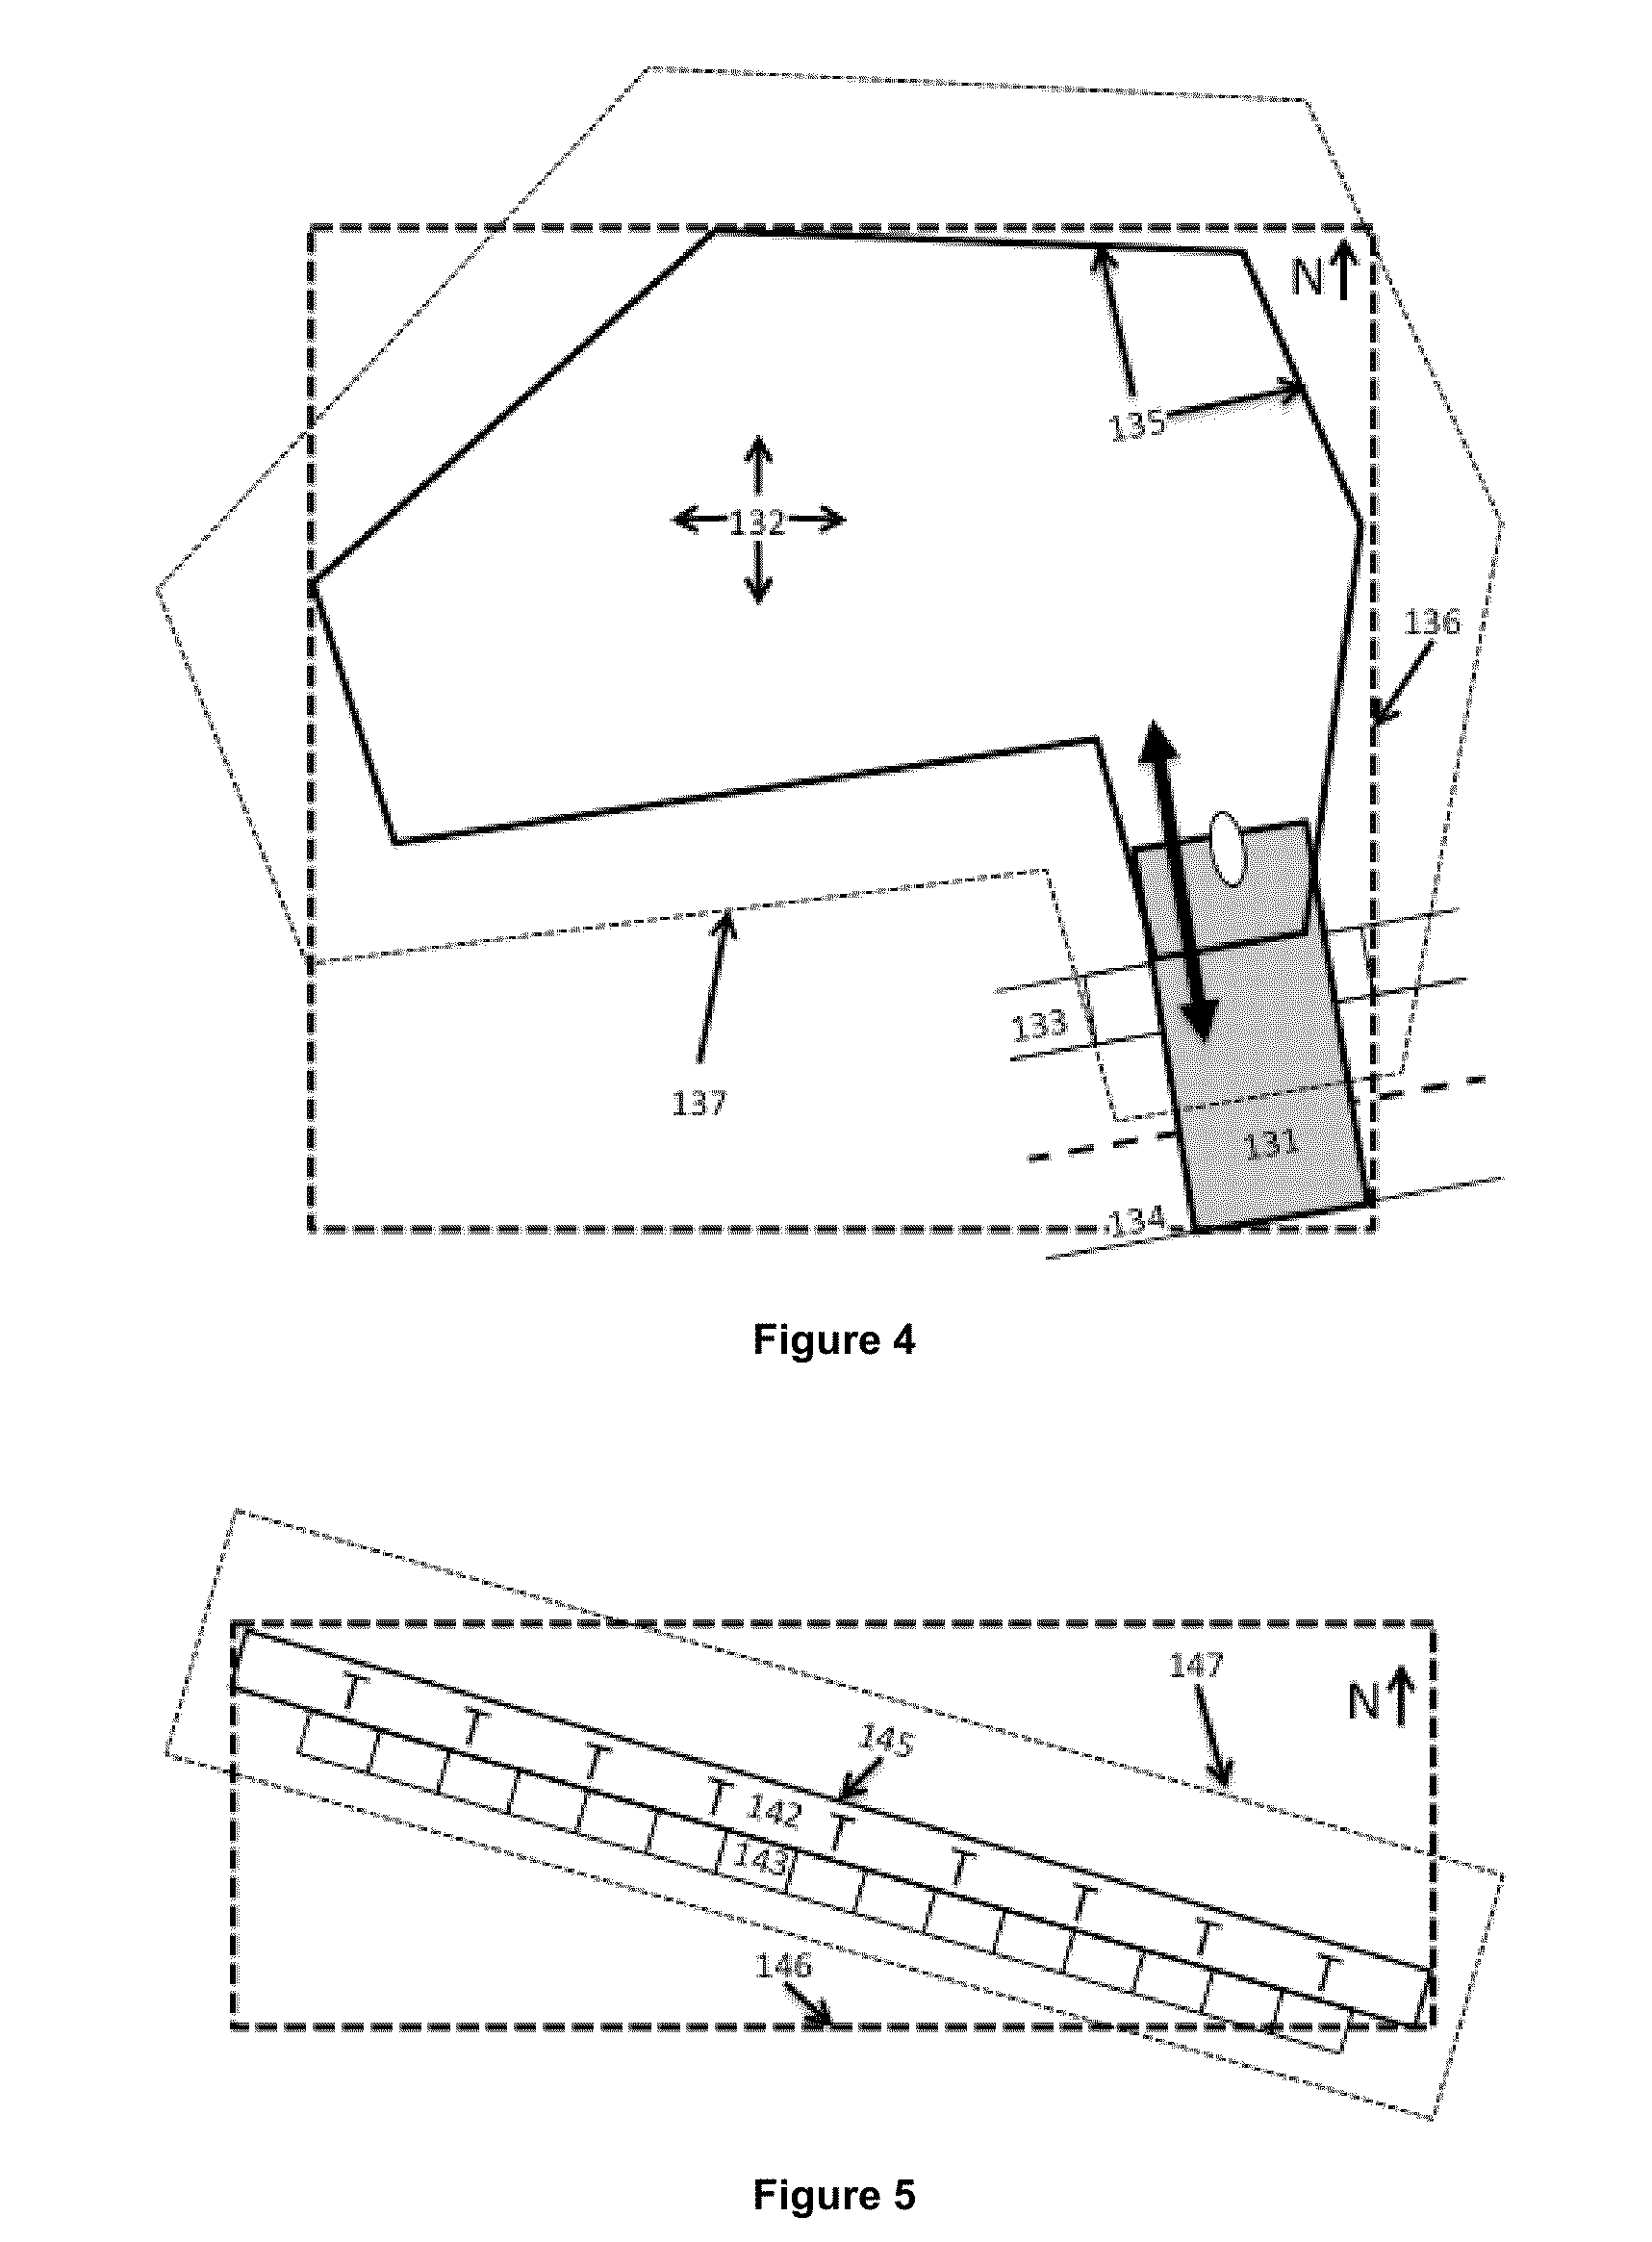 Method of using virtual gantries to optimize the charging performance of in-vehicle parking systems